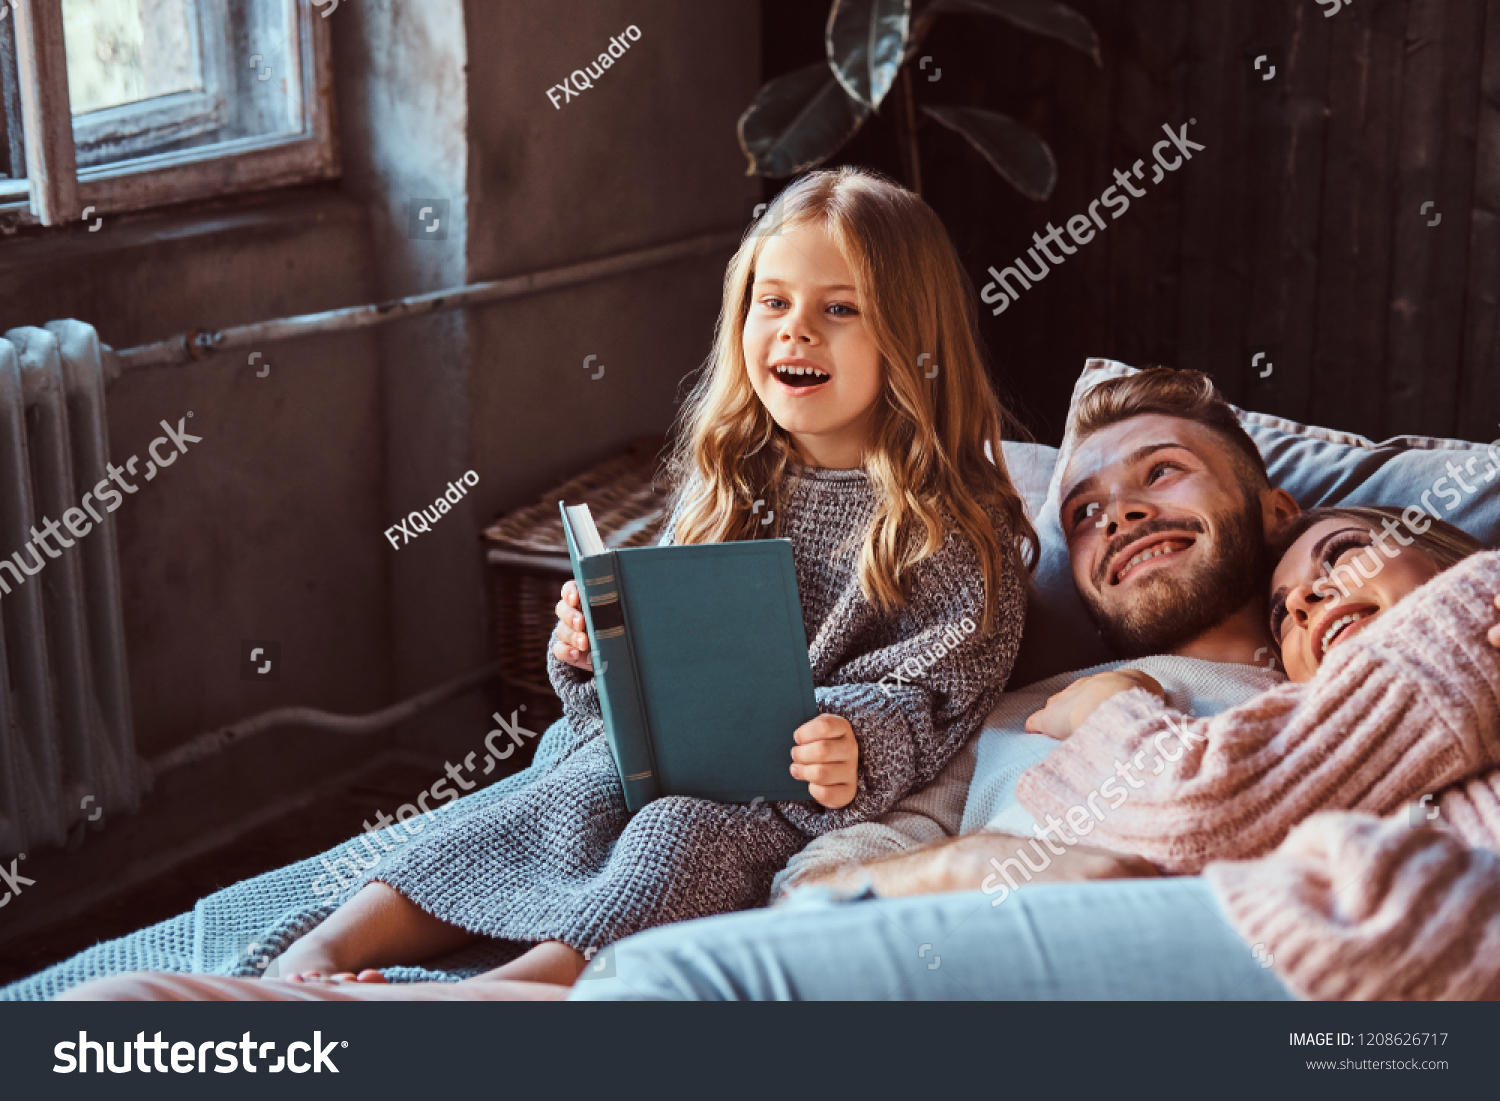 Mom, dad and daughter reading storybook together while lying on bed. #1208626717